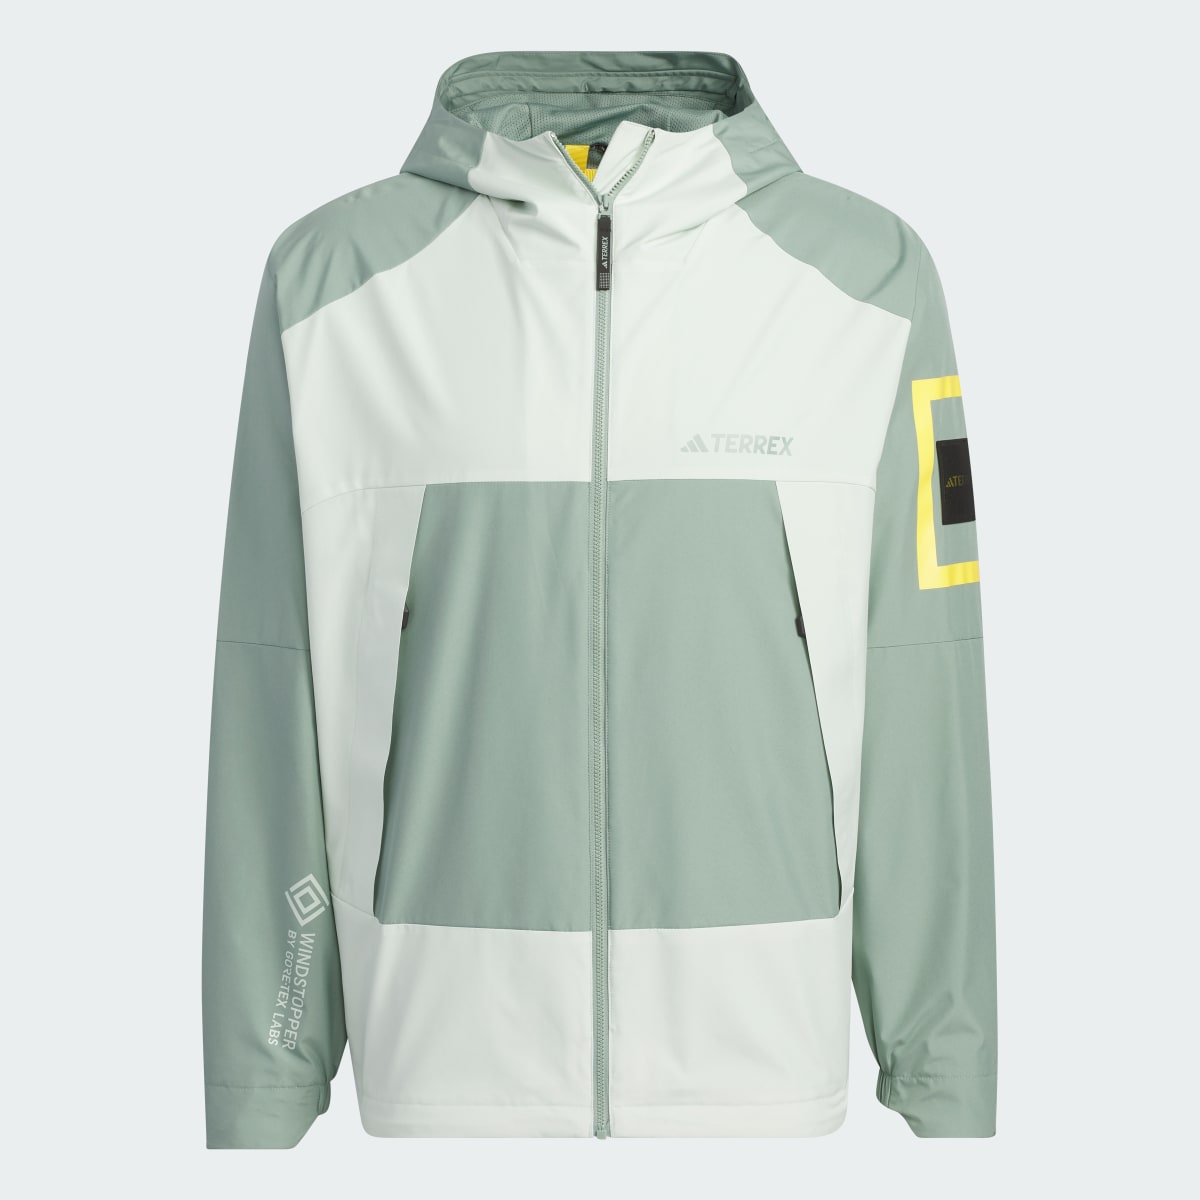 Adidas National Geographic WINDSTOPPER® Jacket. 9